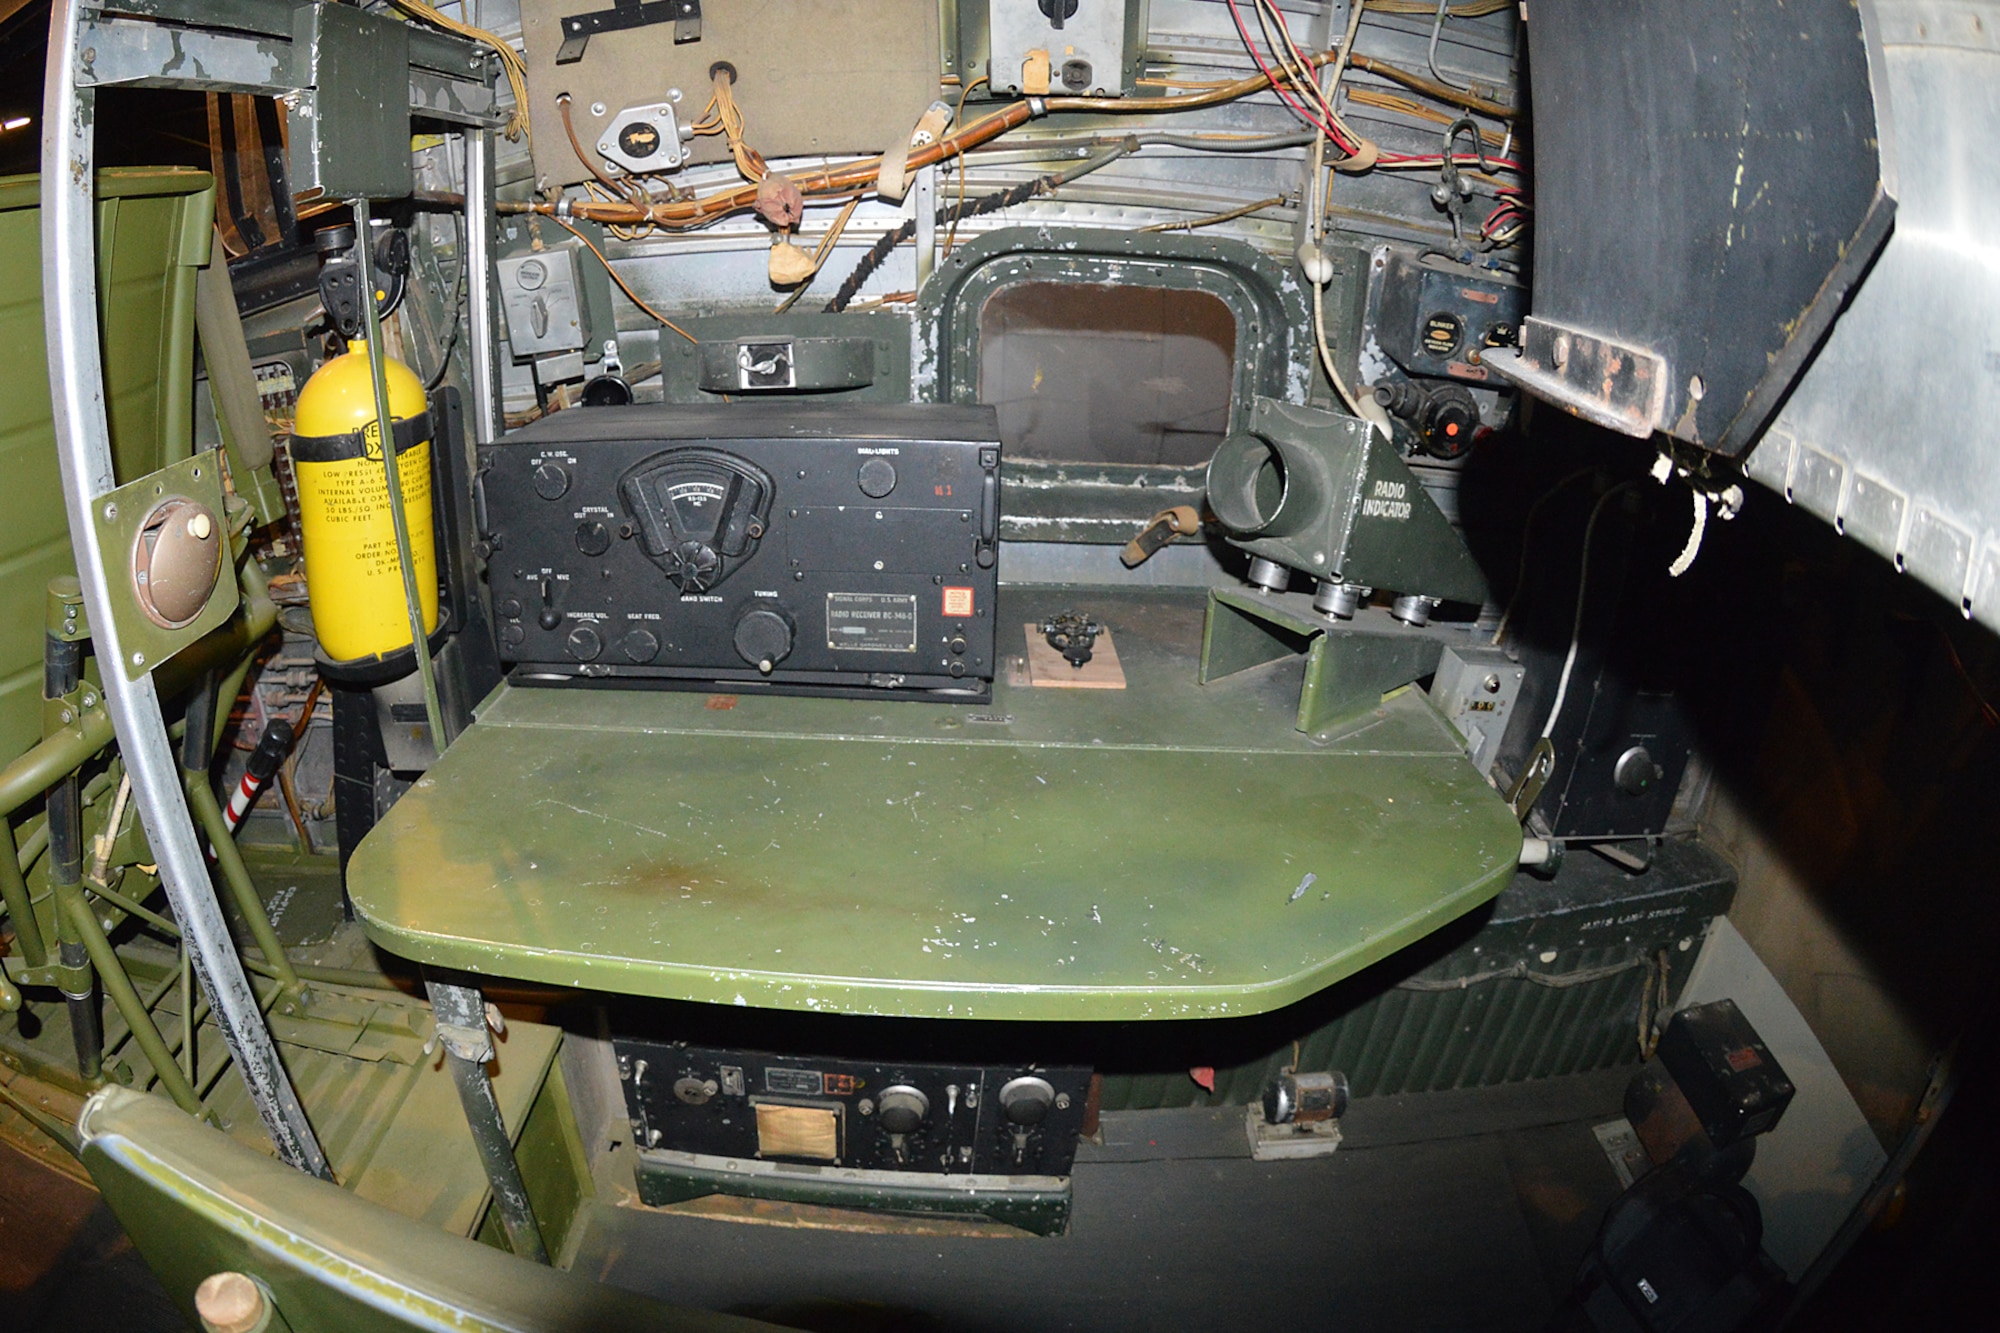 DAYTON, Ohio - Consolidated B-24D interior at the National Museum of the U.S. Air Force. (U.S. Air Force photo)
